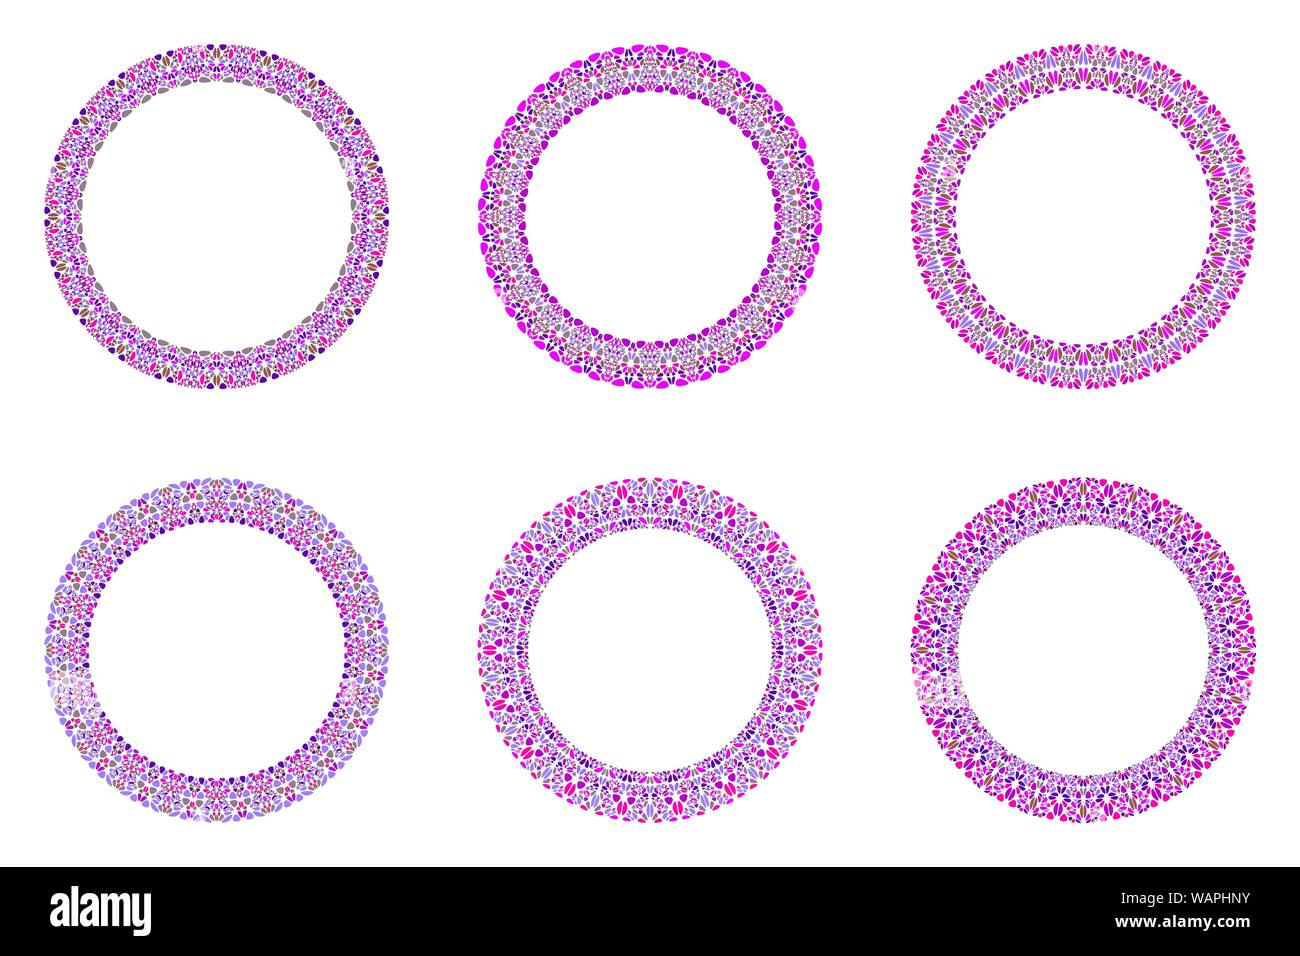 Mosaic circular border set - abstract round vector design elements on background Stock Vector